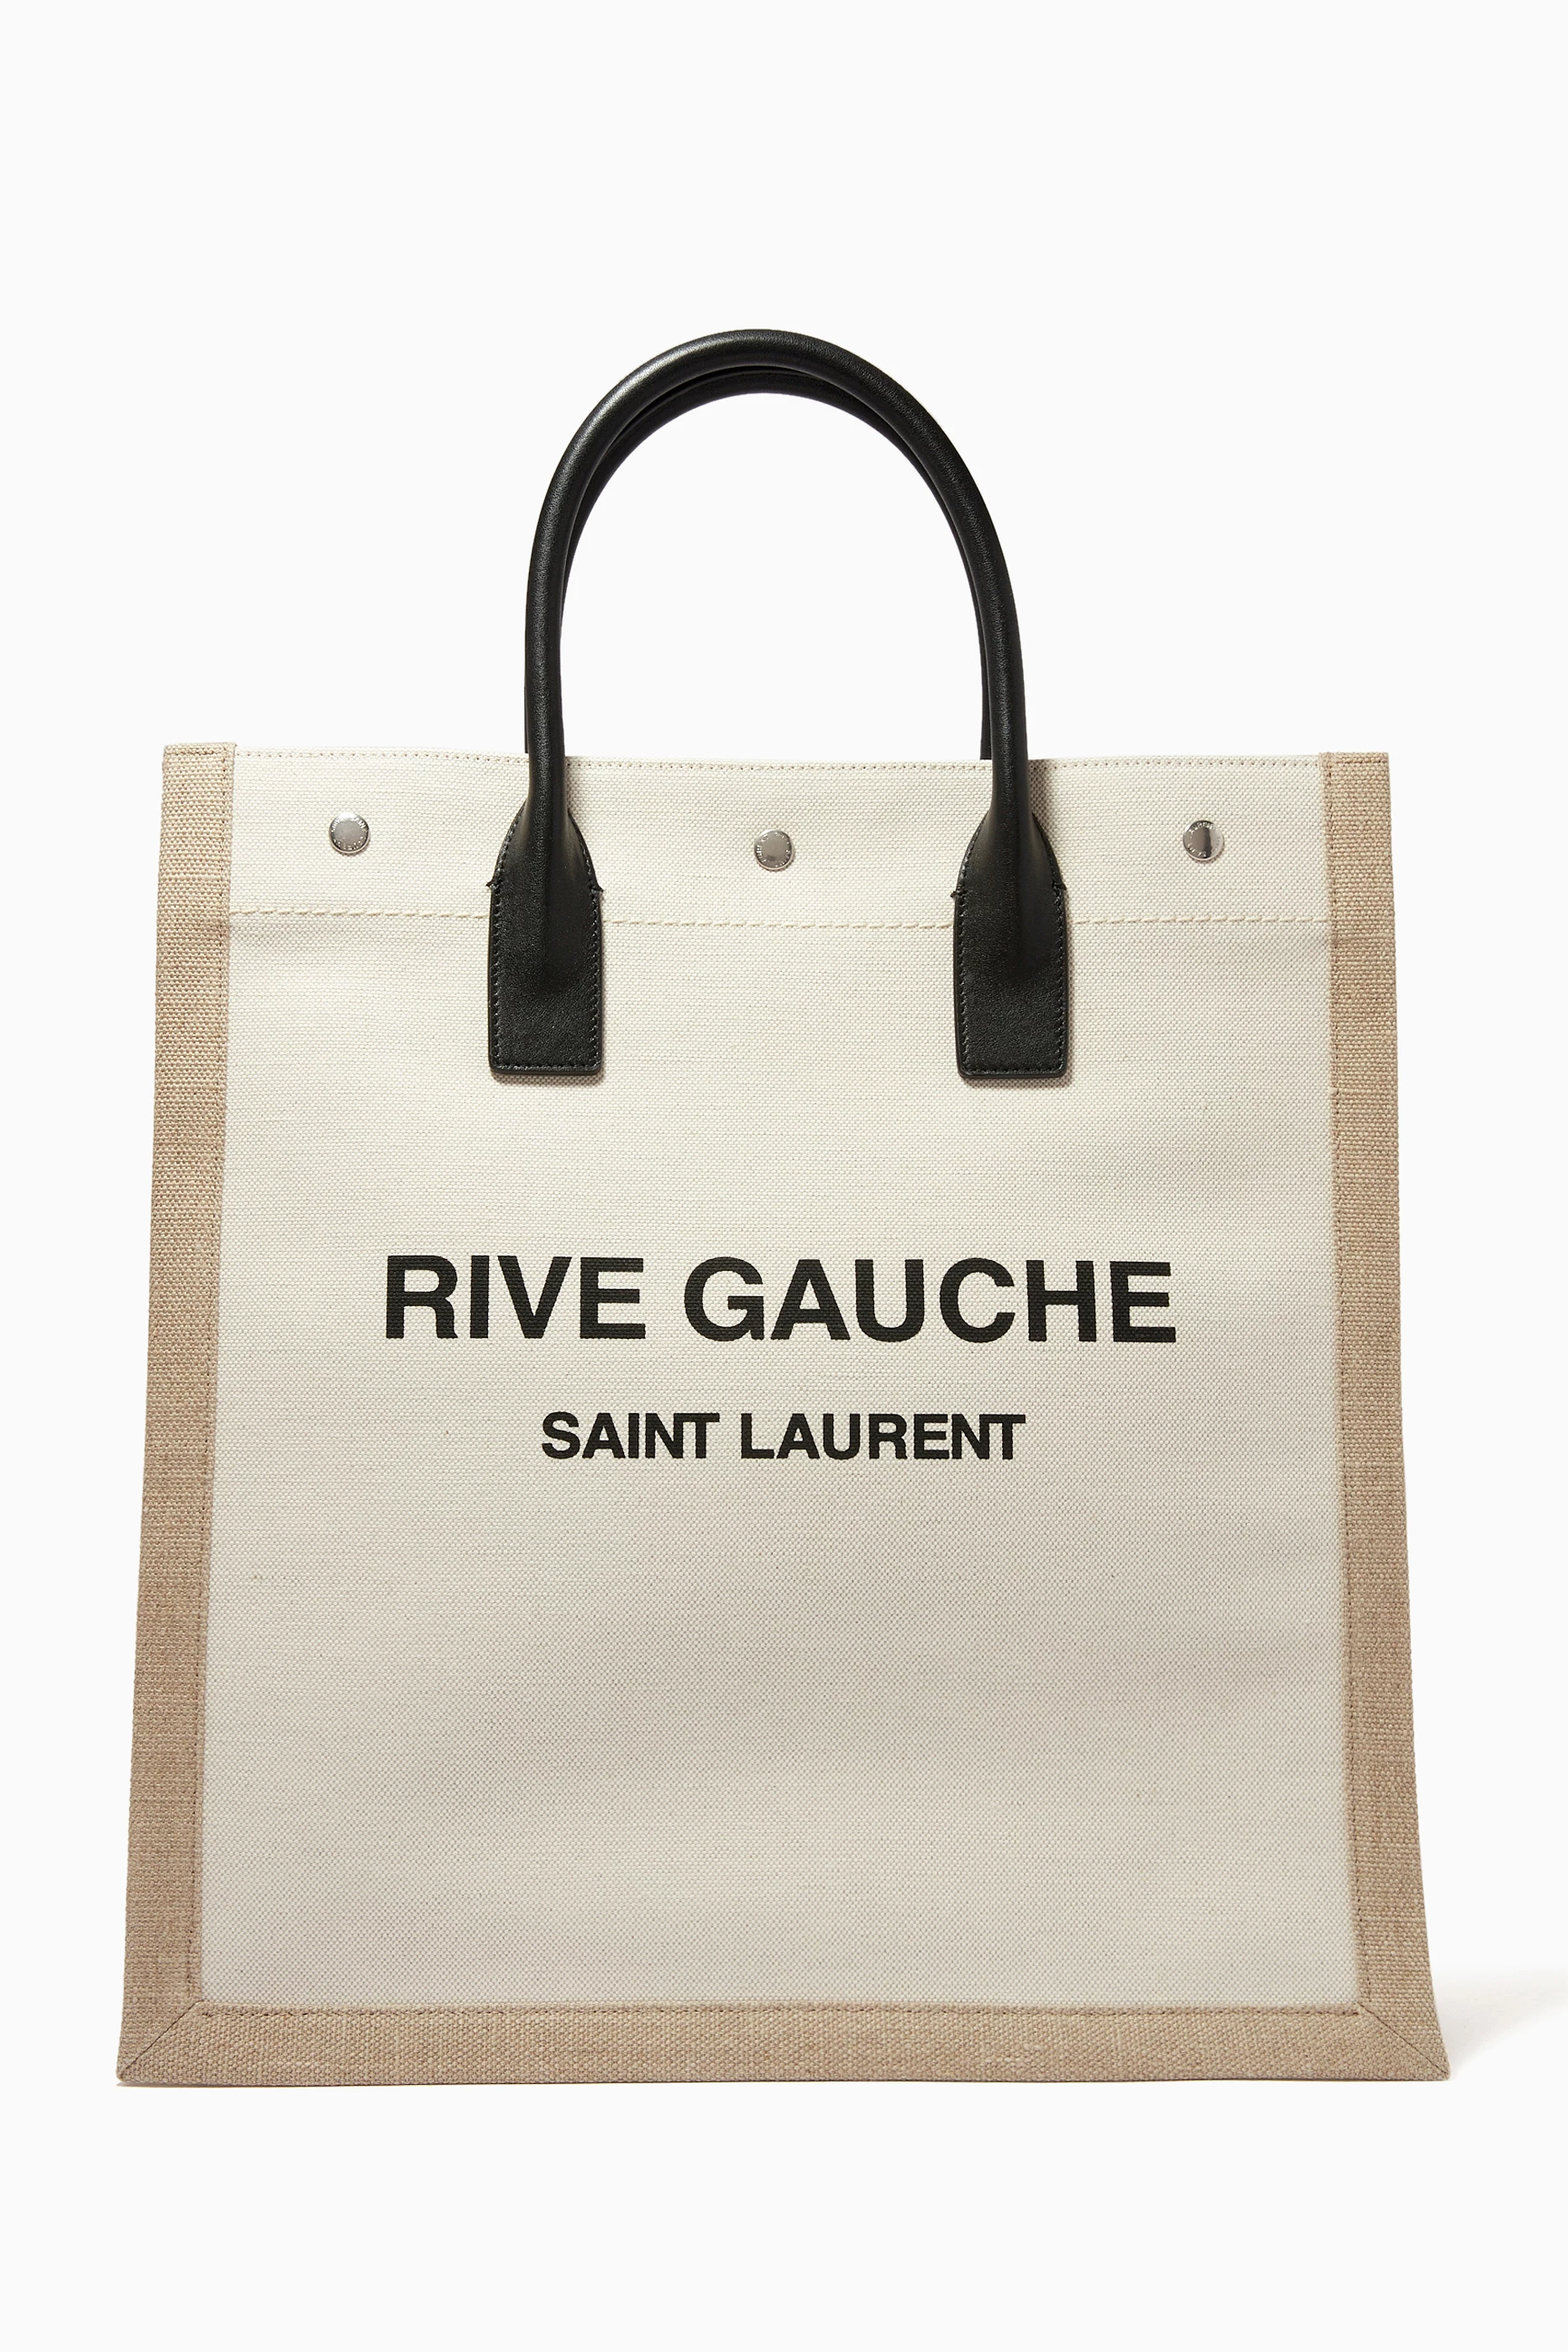 Saint Laurent Rive Gauche N/s Canvas & Leather Tote in Natural